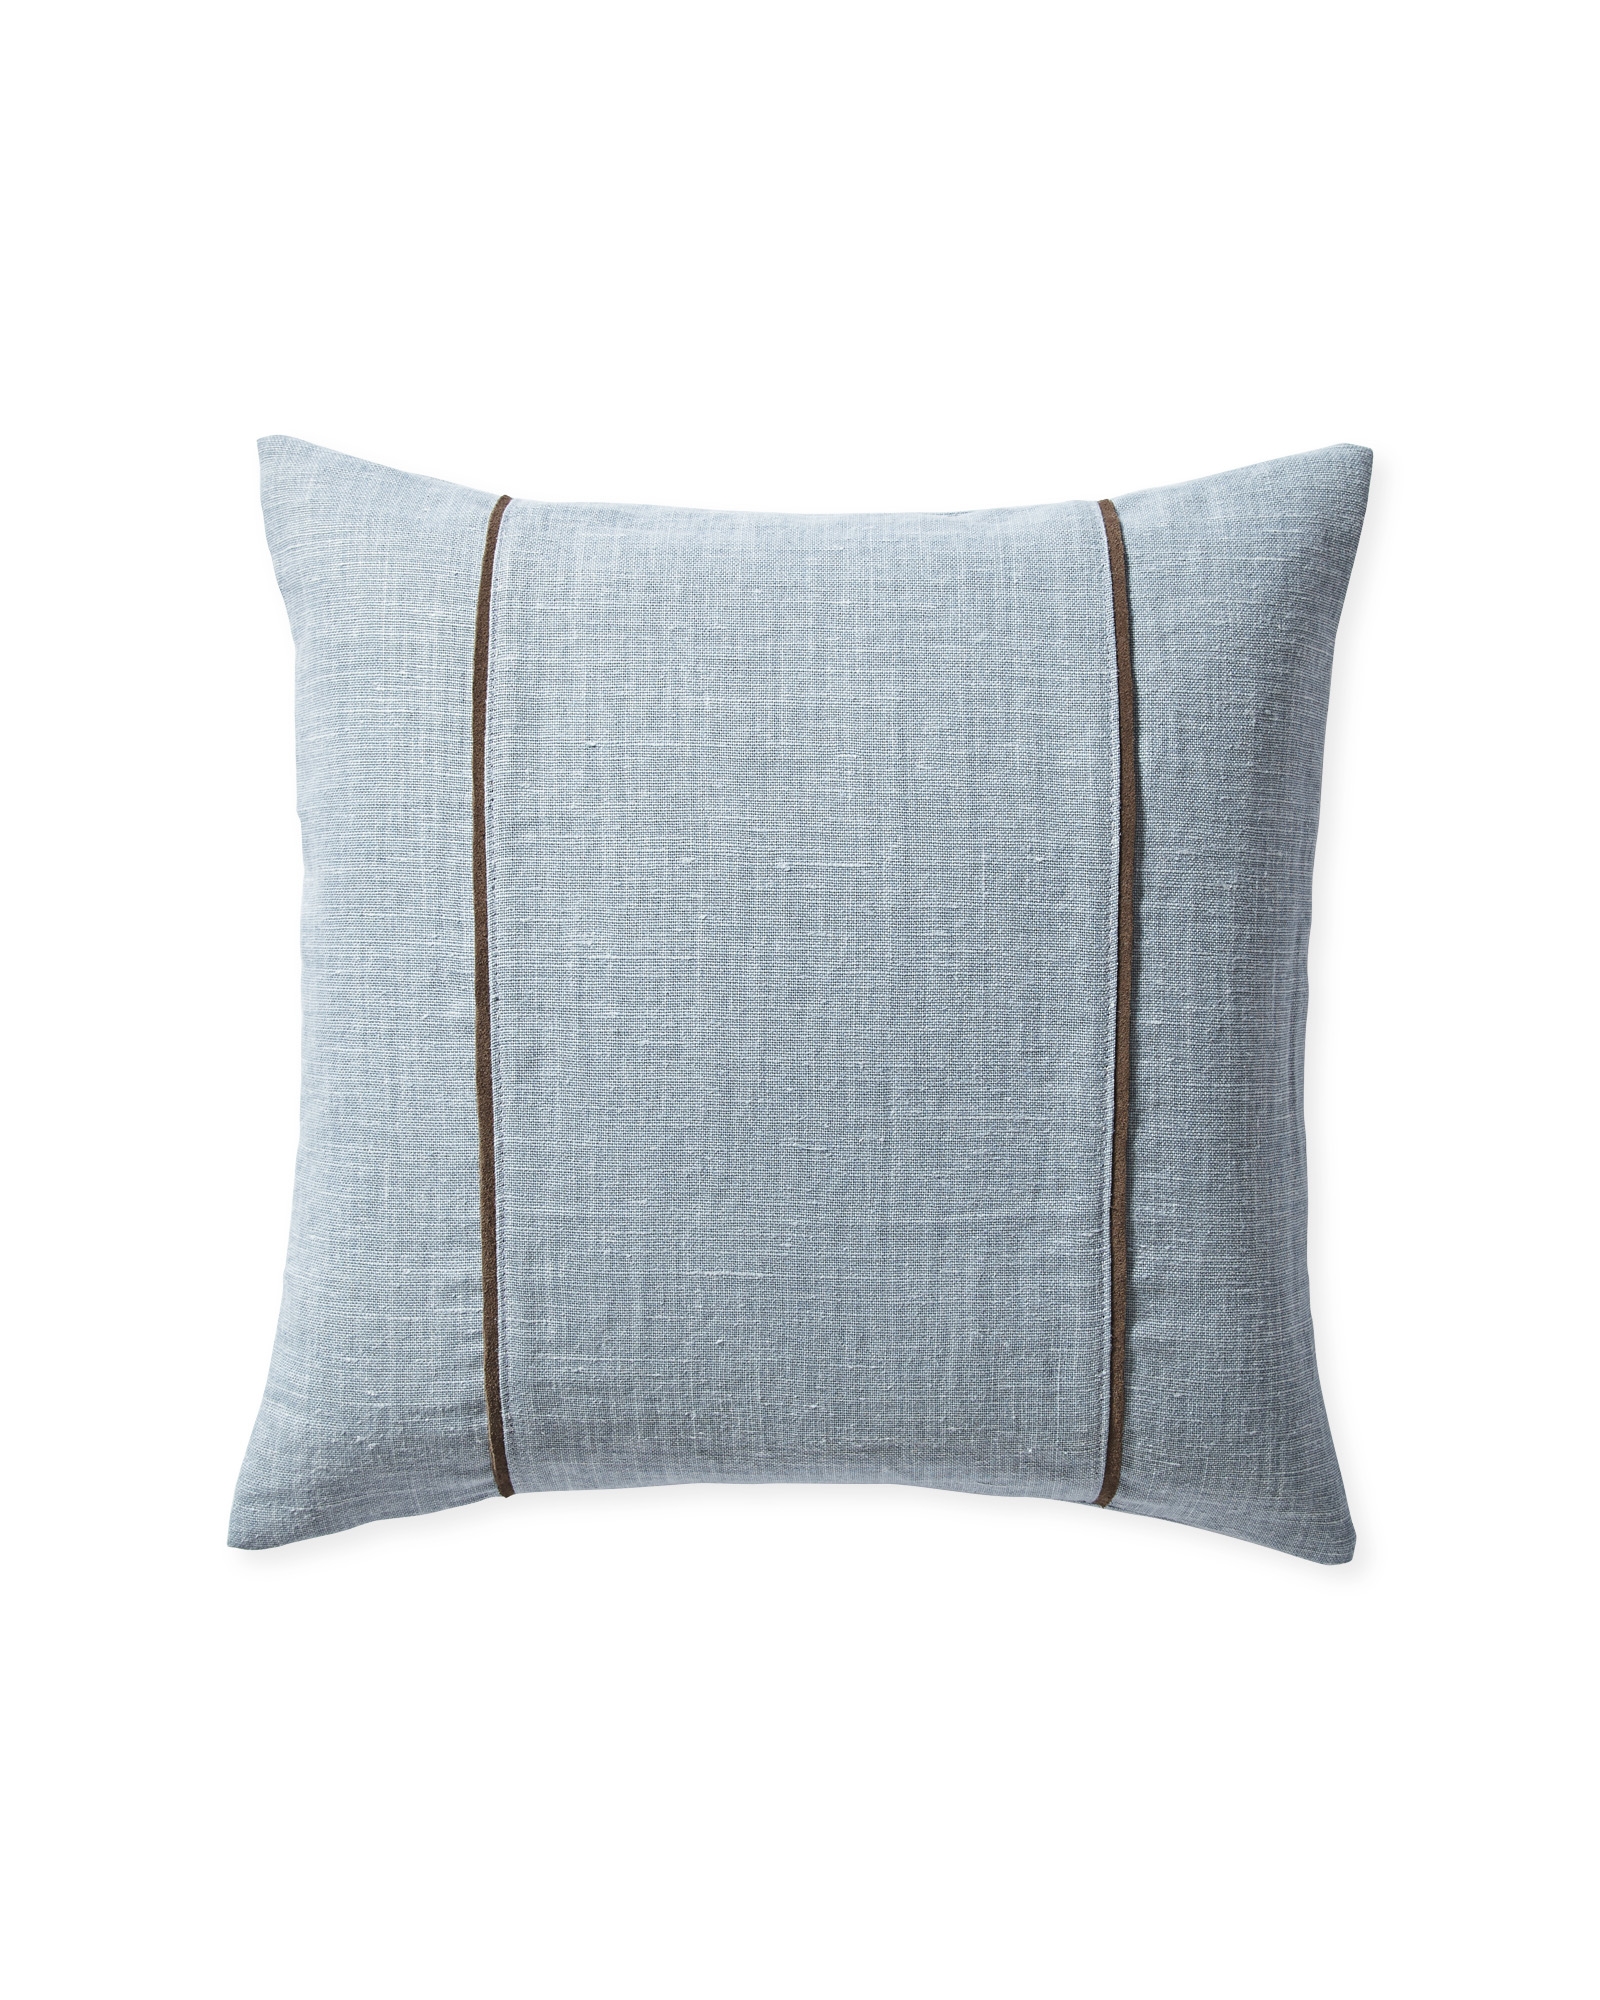 Kentfield 20" SQ Pillow Cover - Coastal Blue - Insert sold separately - Image 0